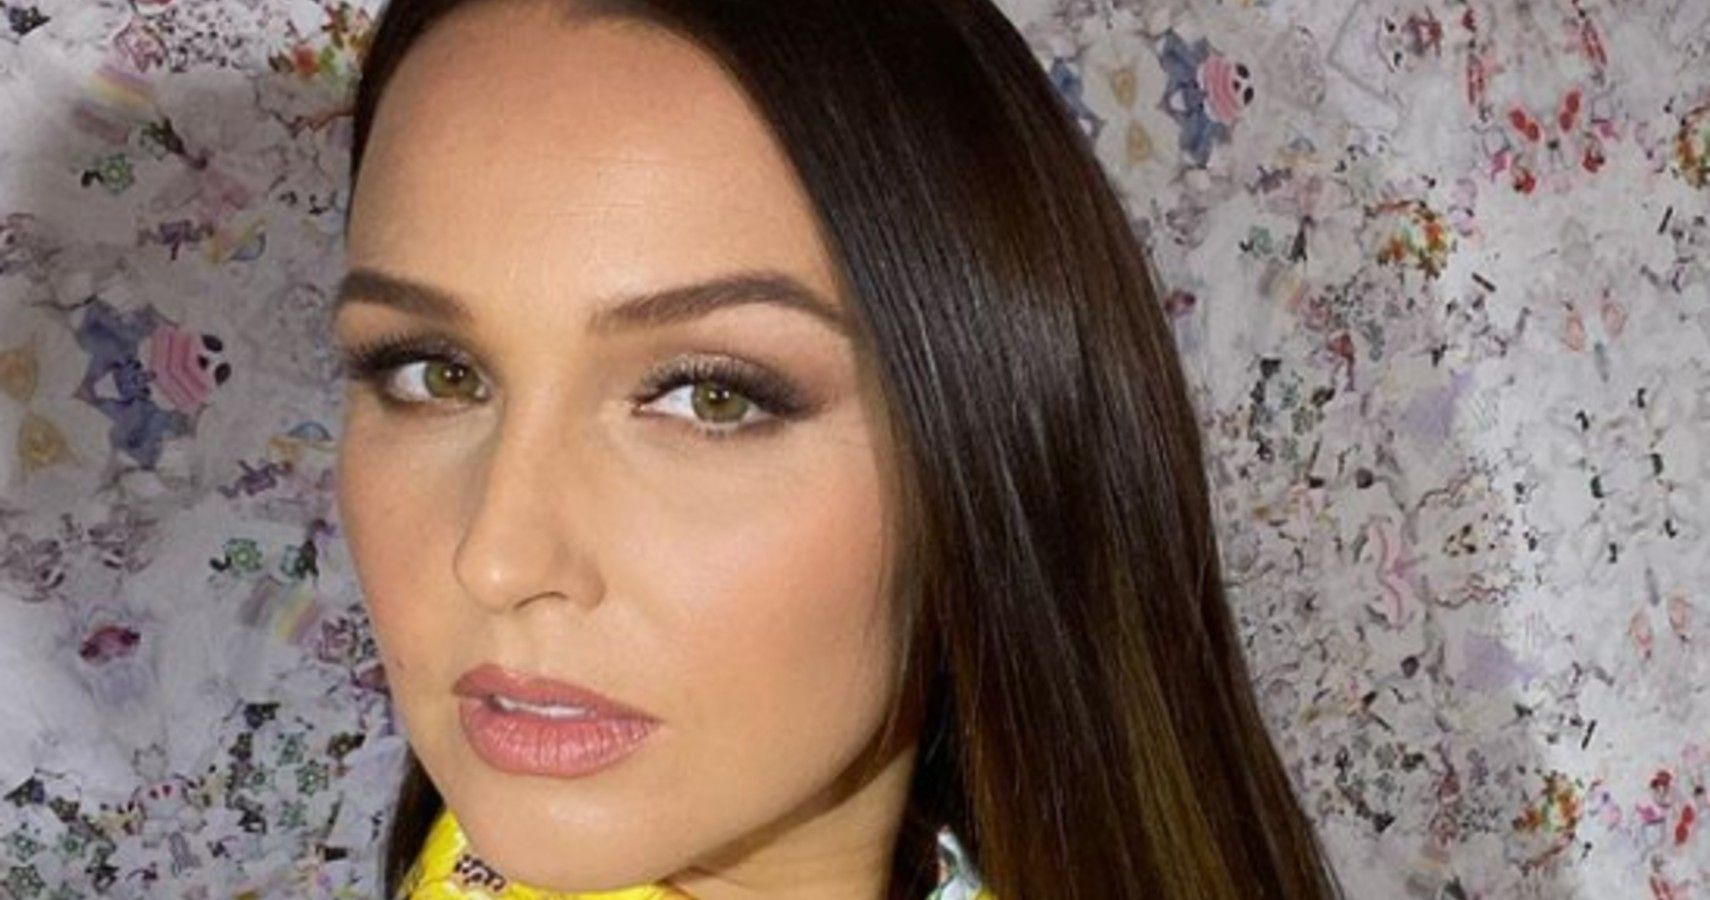 Camilla Luddington Relates To Moms Who've Given Birth With Masks On